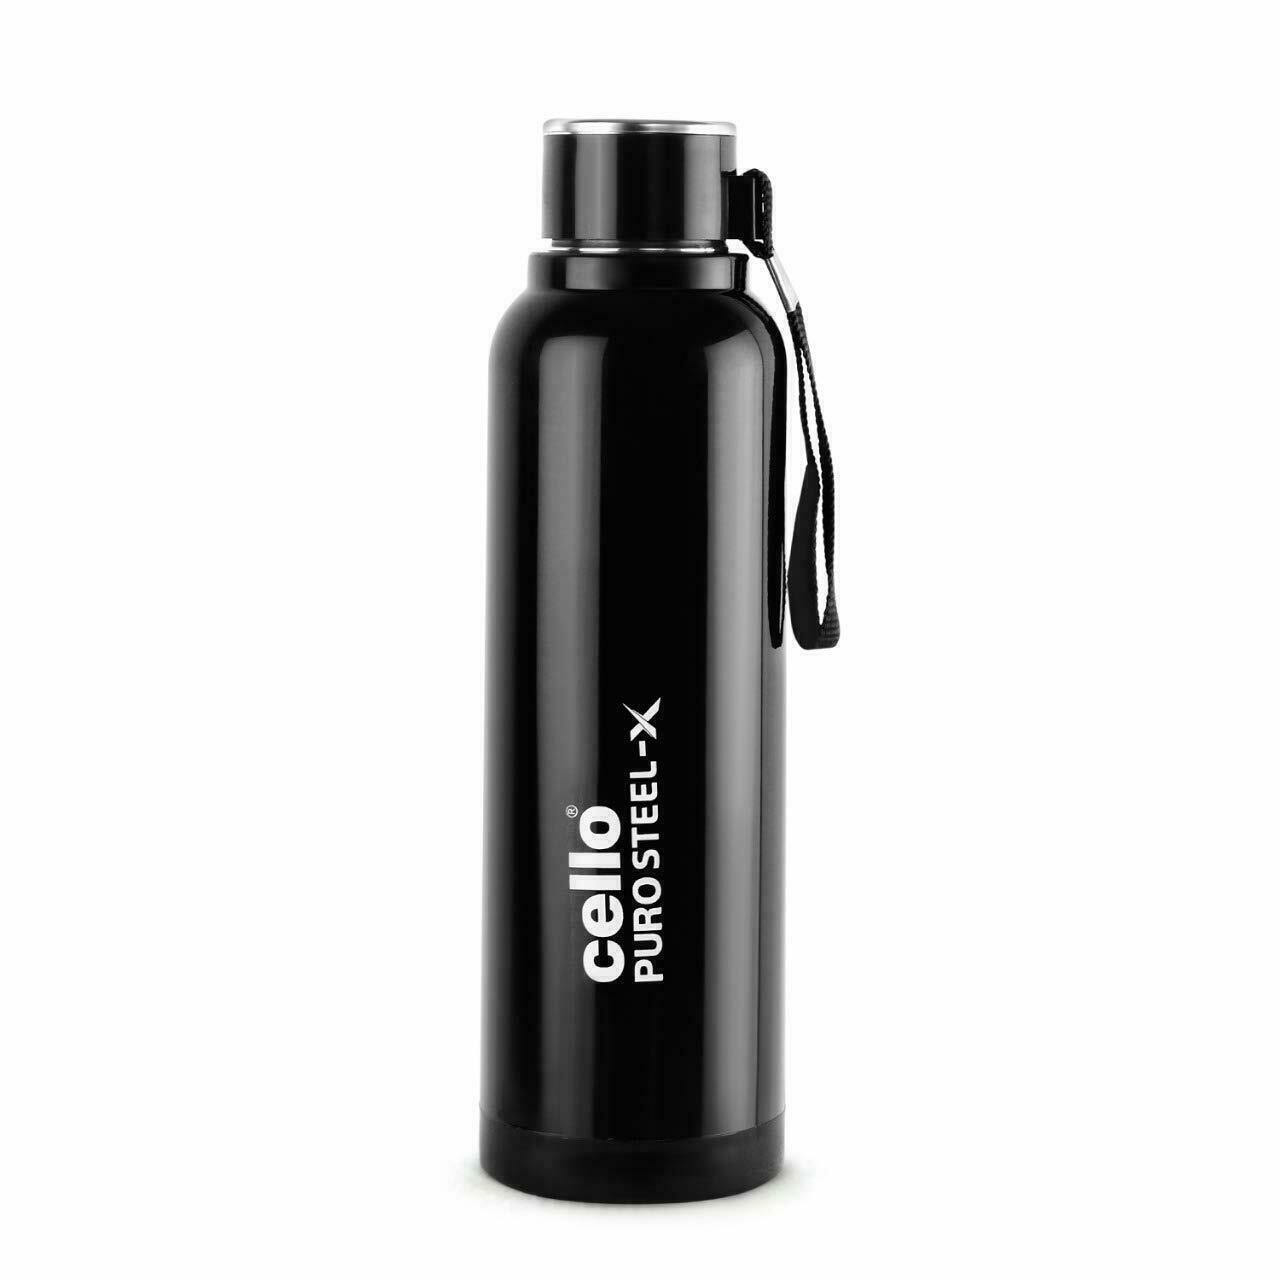 Drinkware Inner Steel Outer Plastic With Pu Insulation Water Bottle 900 Ml Black